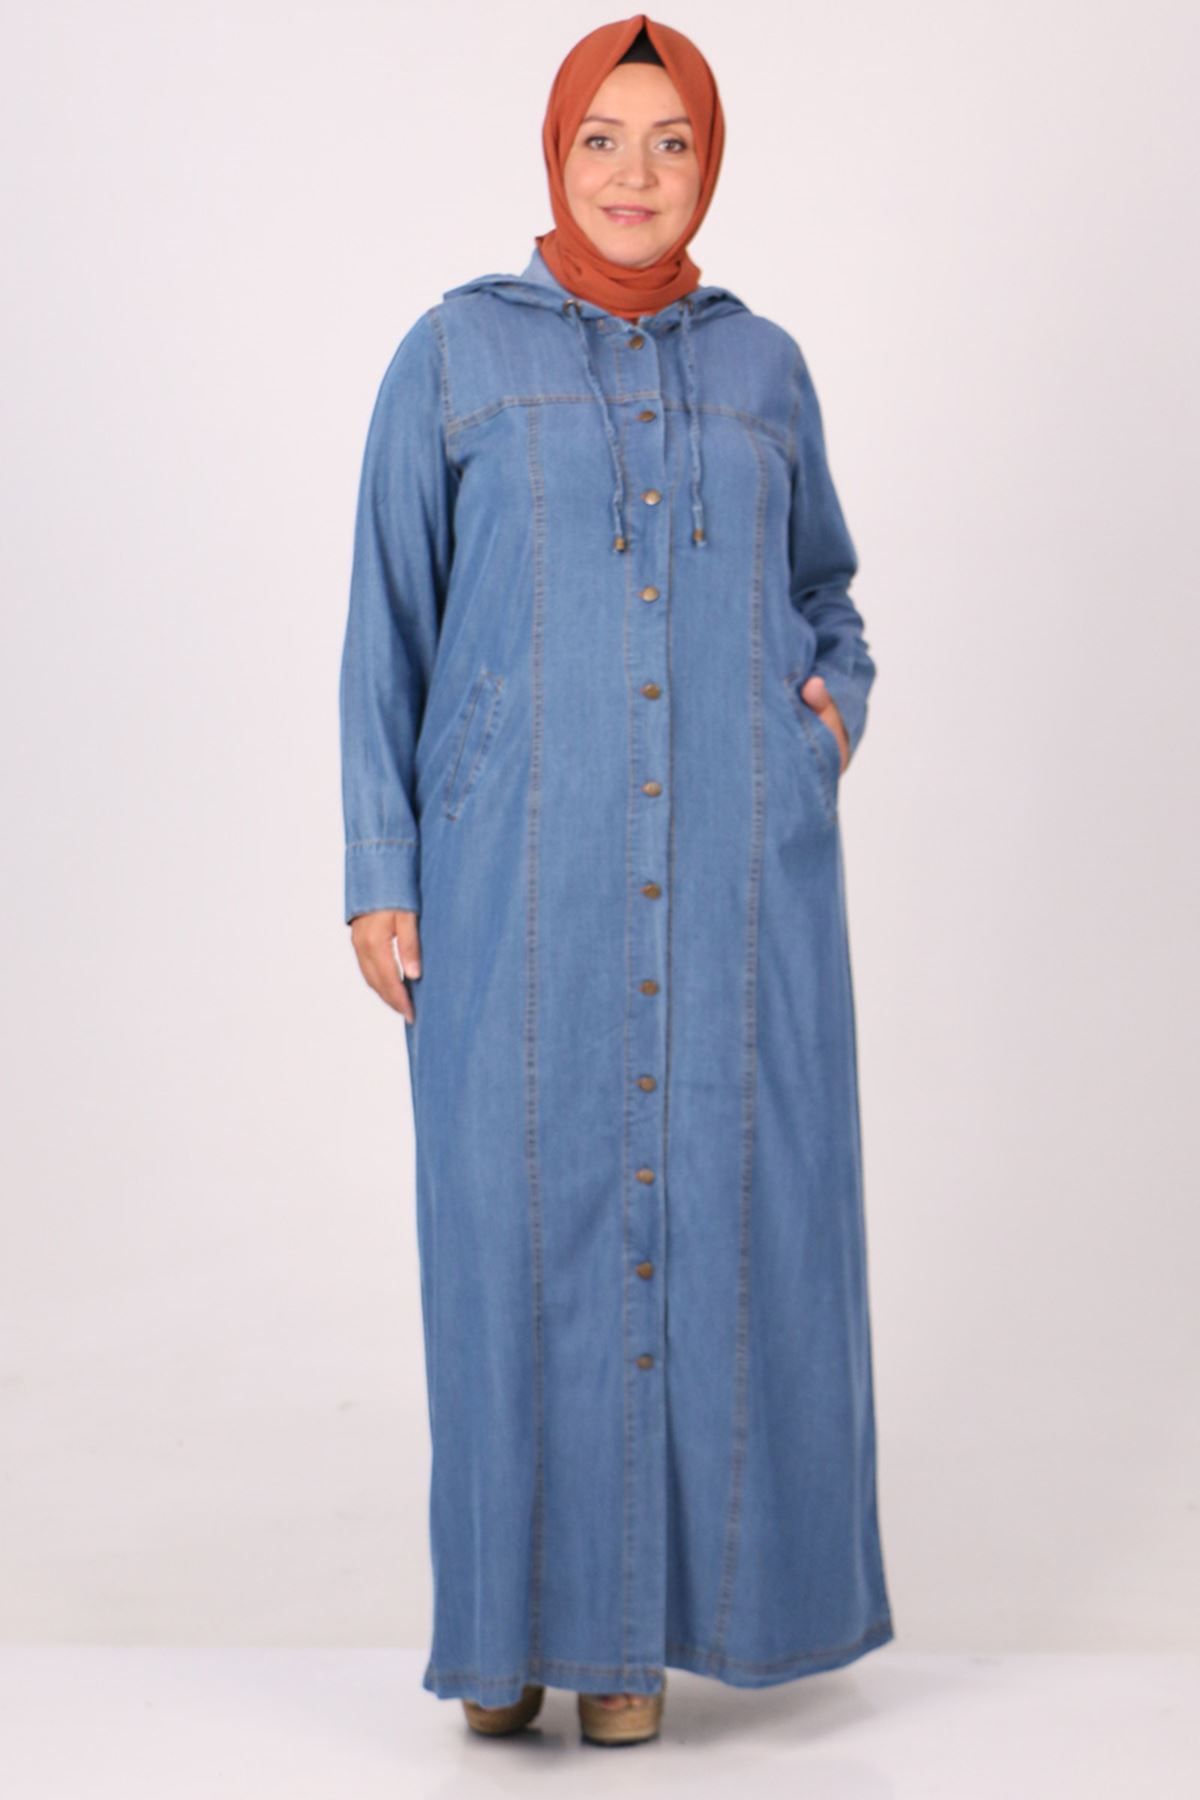 26007 Large Size Buttoned Jeans Abaya - Ice Blue